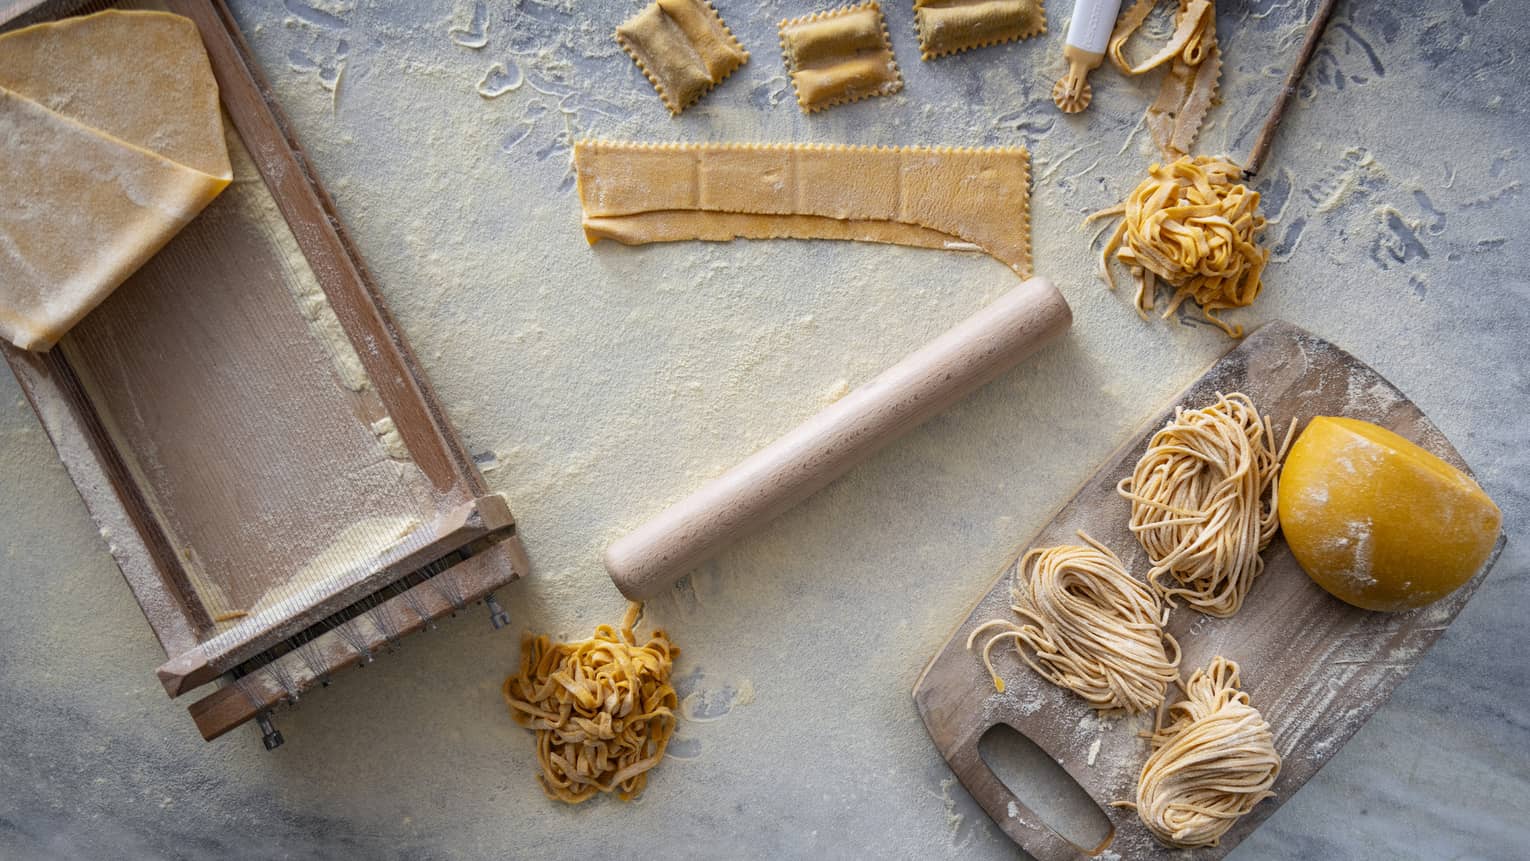 Marble slab covered in flour with a wooden rolling pin, pasta stretcher and cutting board topped with pasta in various states of completion